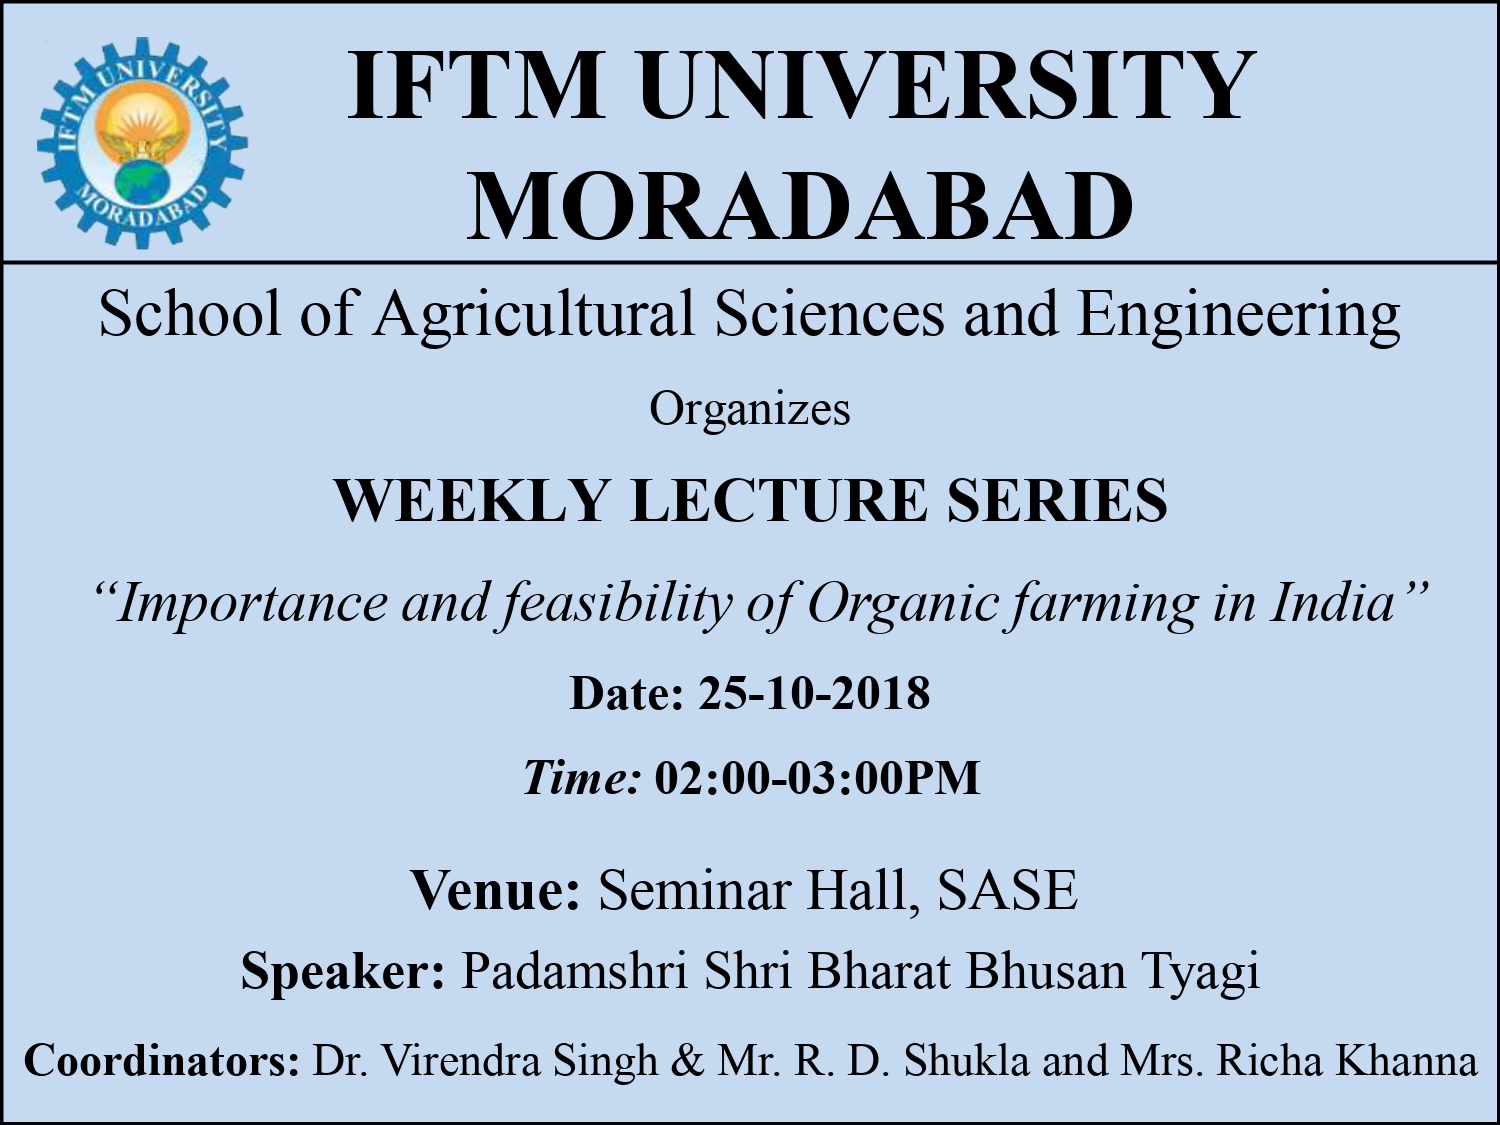 Weekly Lecture Series: “Importance and feasibility of Organic farming in India”